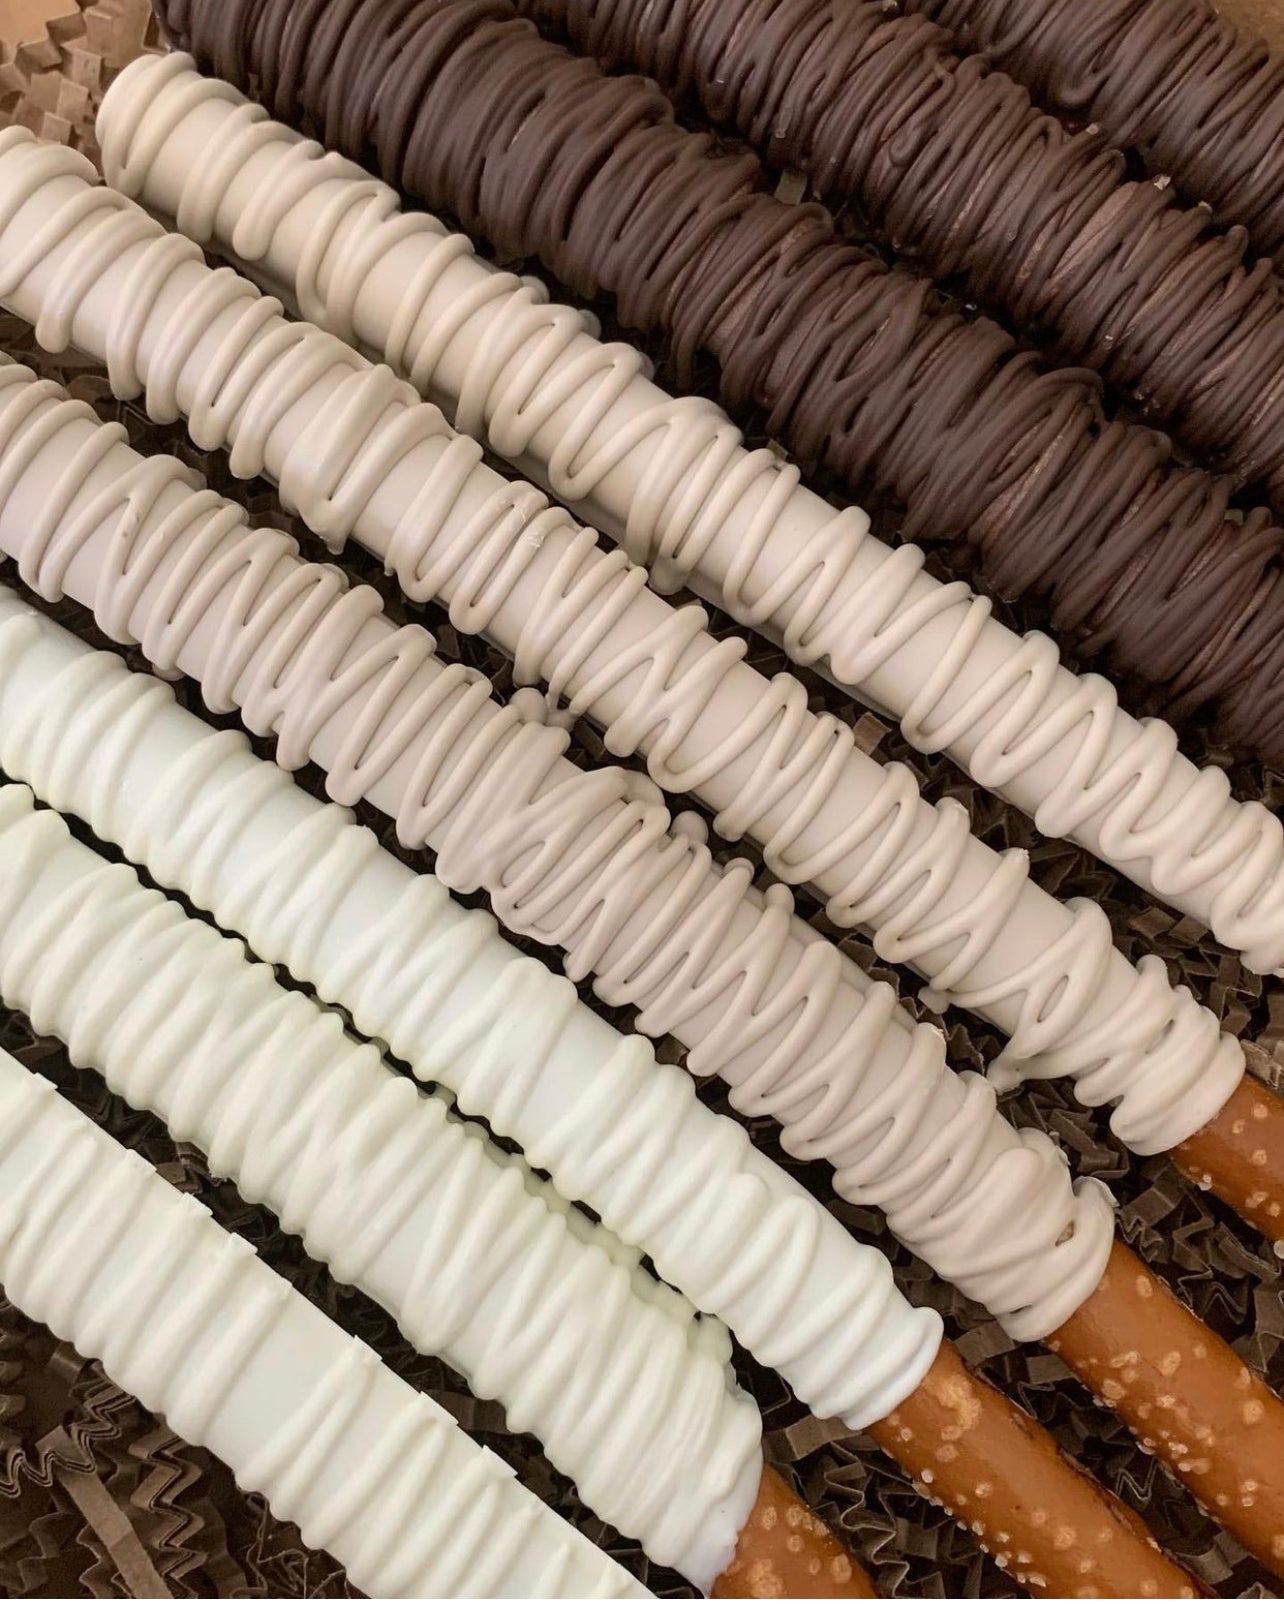 Classic Chocolate Covered Pretzels